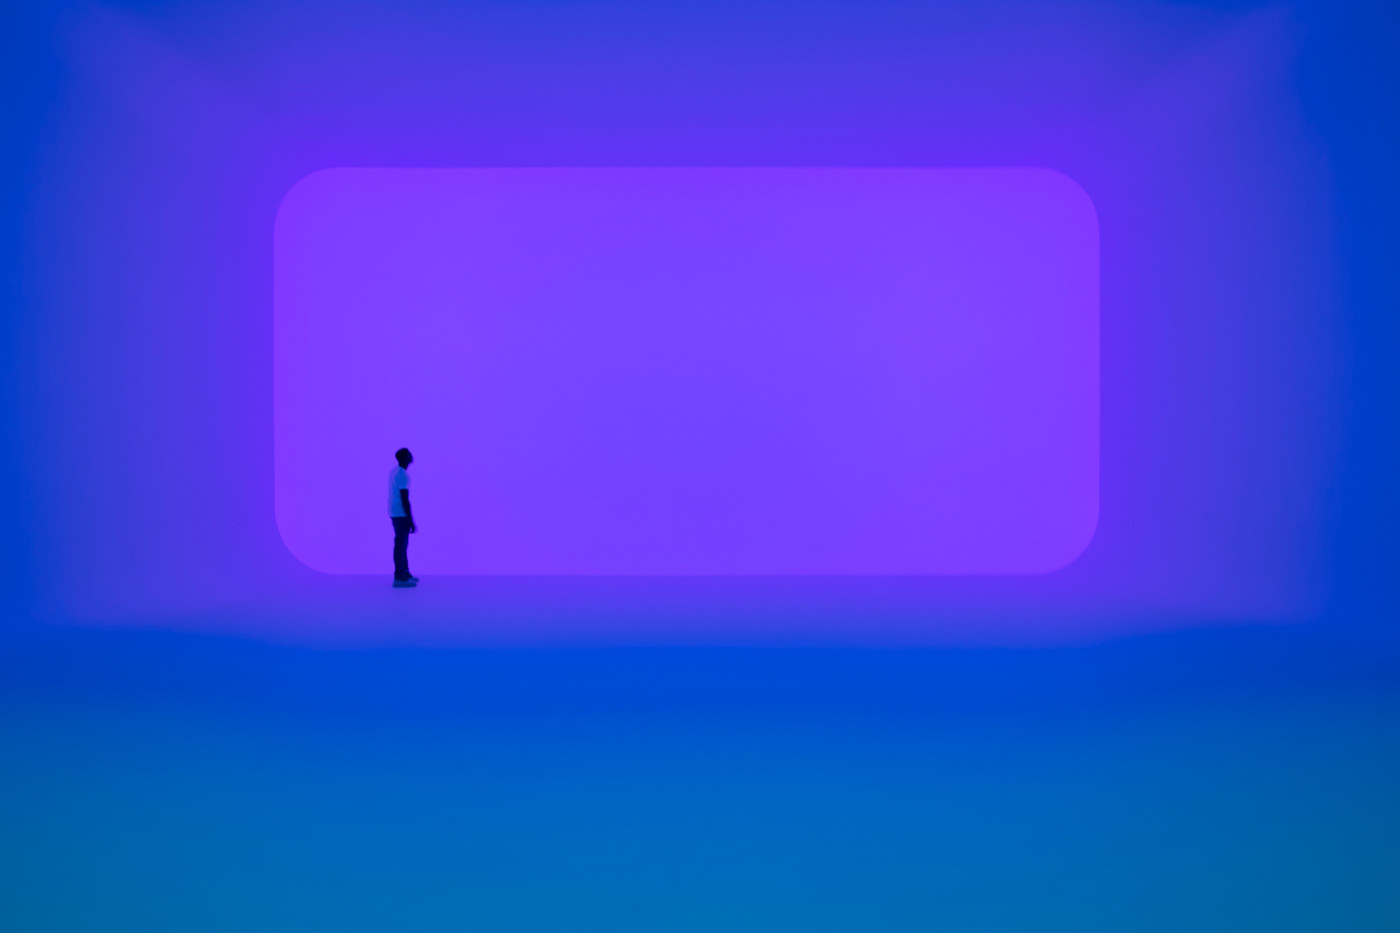 MAN STANDS IN BLUE ROOM WITH PURPLE WALL IN SUPERBLUE MIAMI’S IMMERSIVE INSTALLATION SPACE